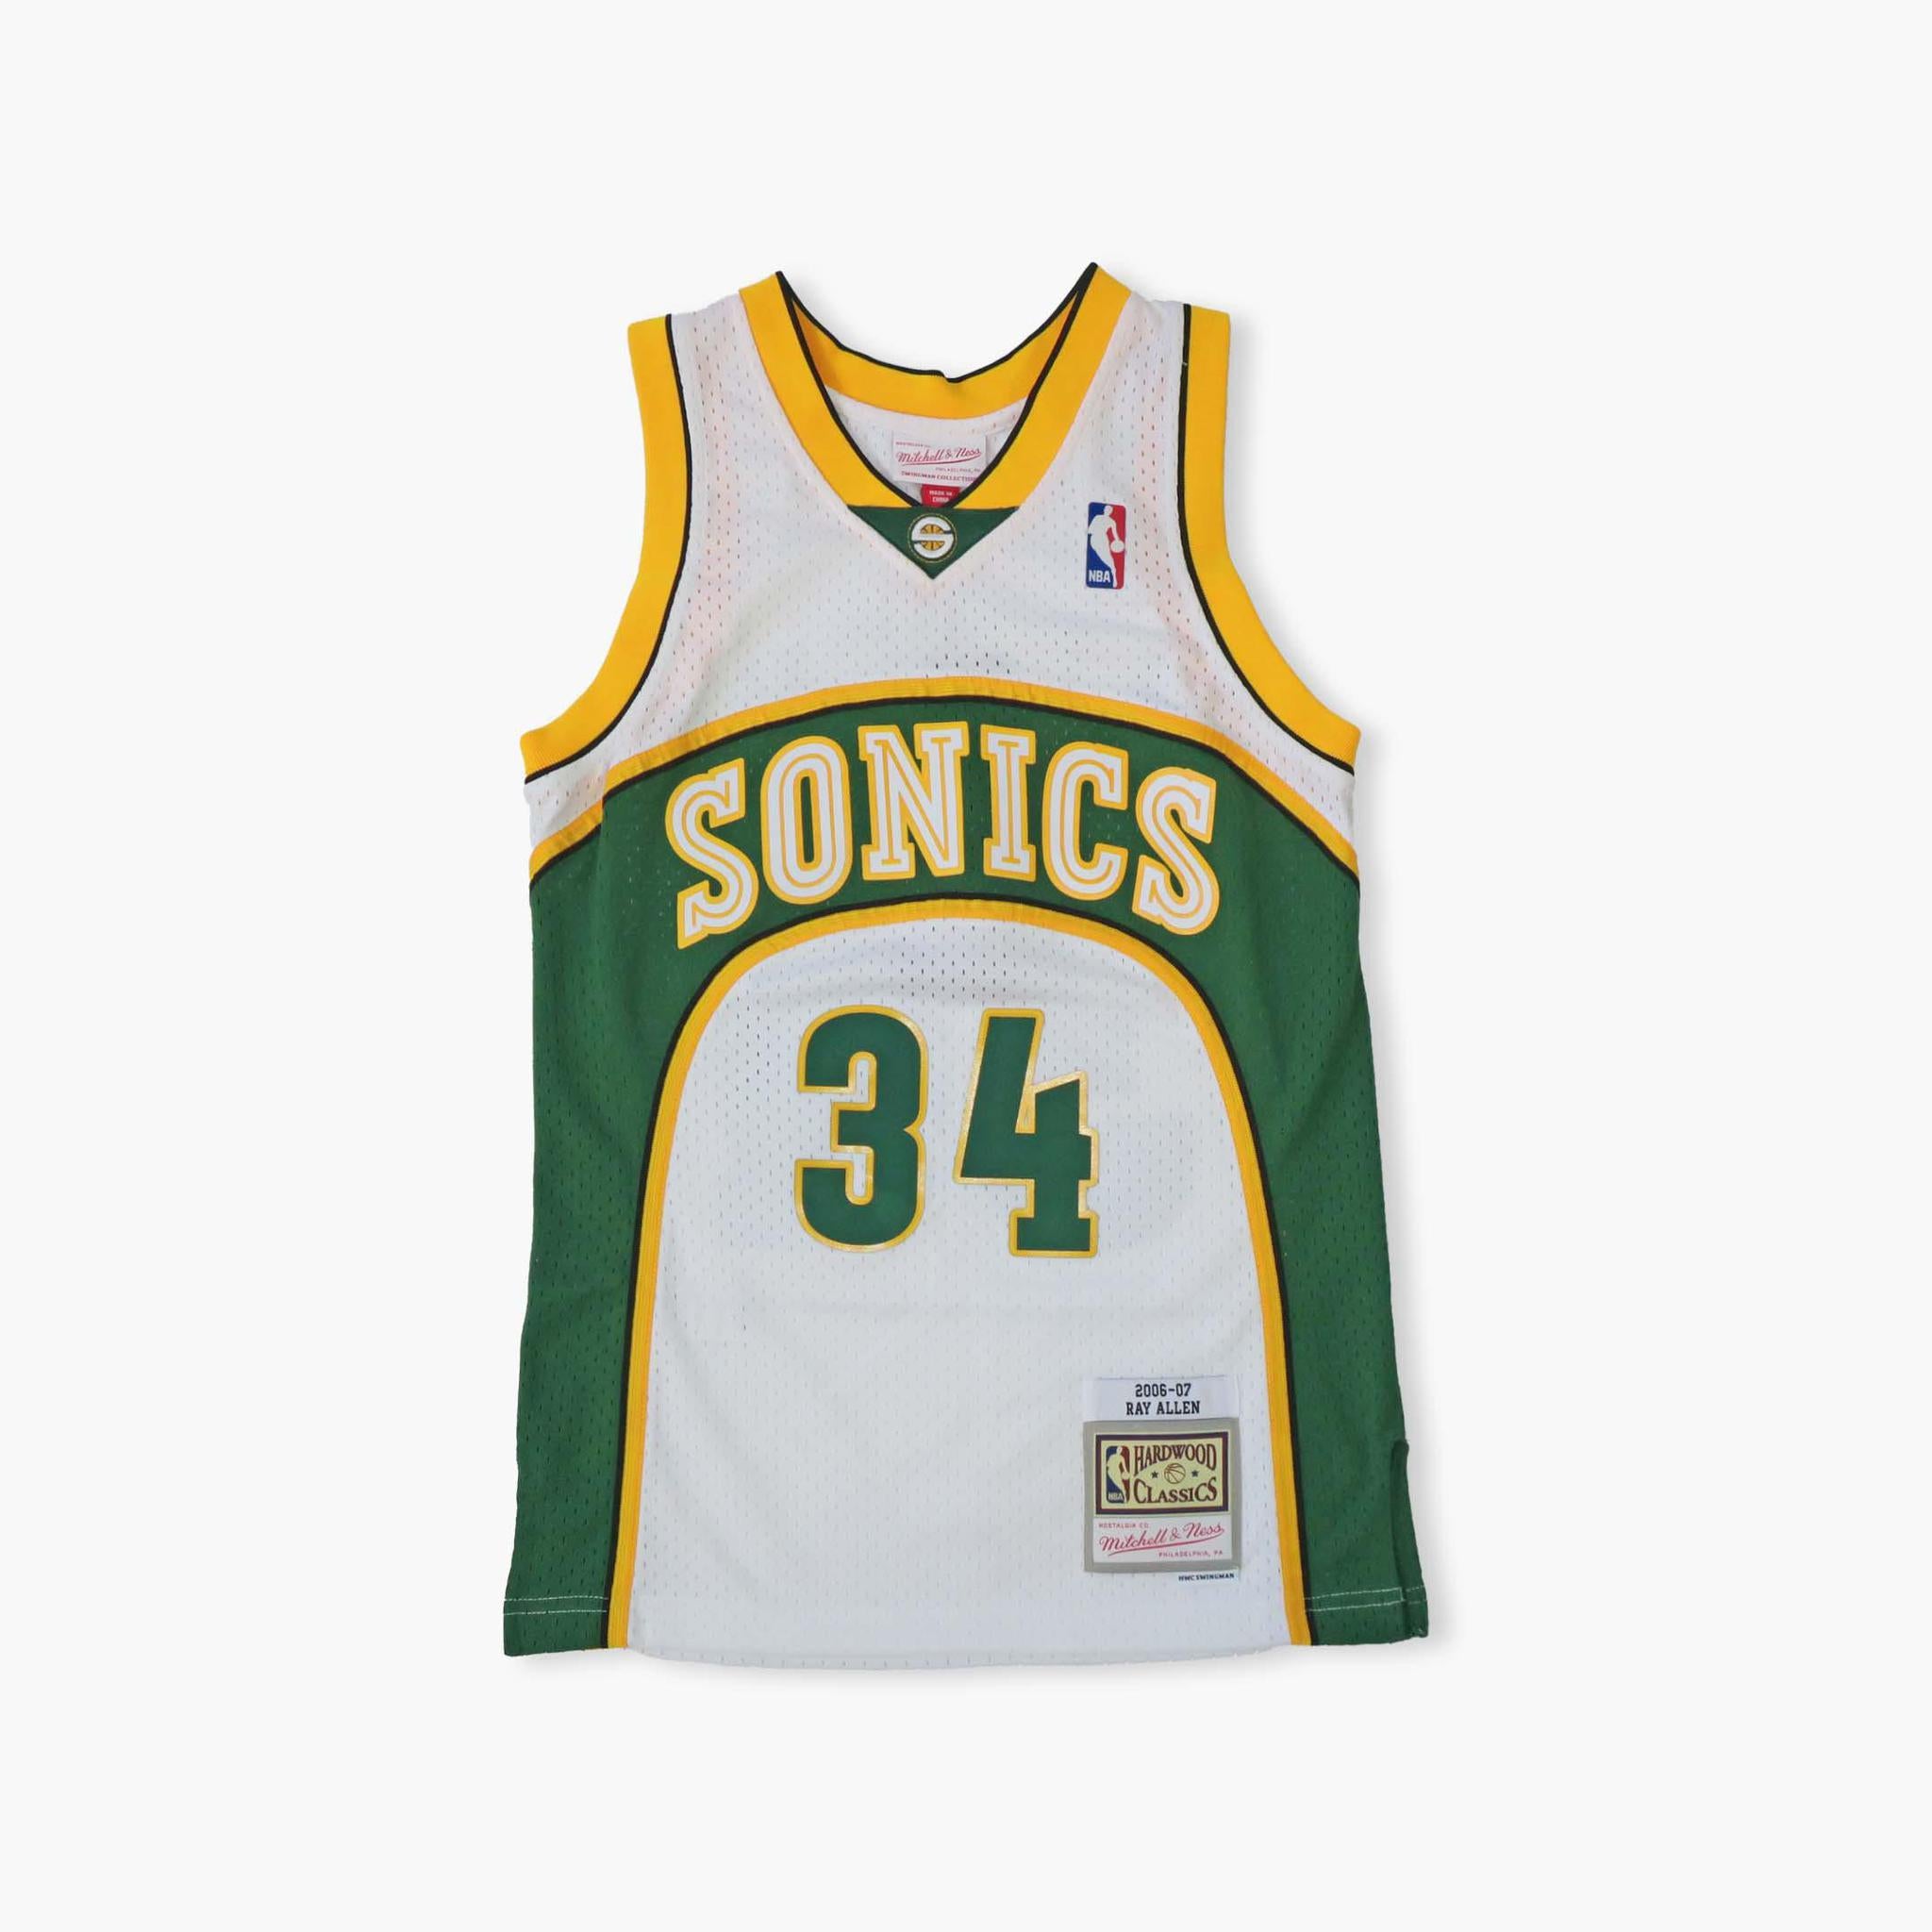 supersonic jersey